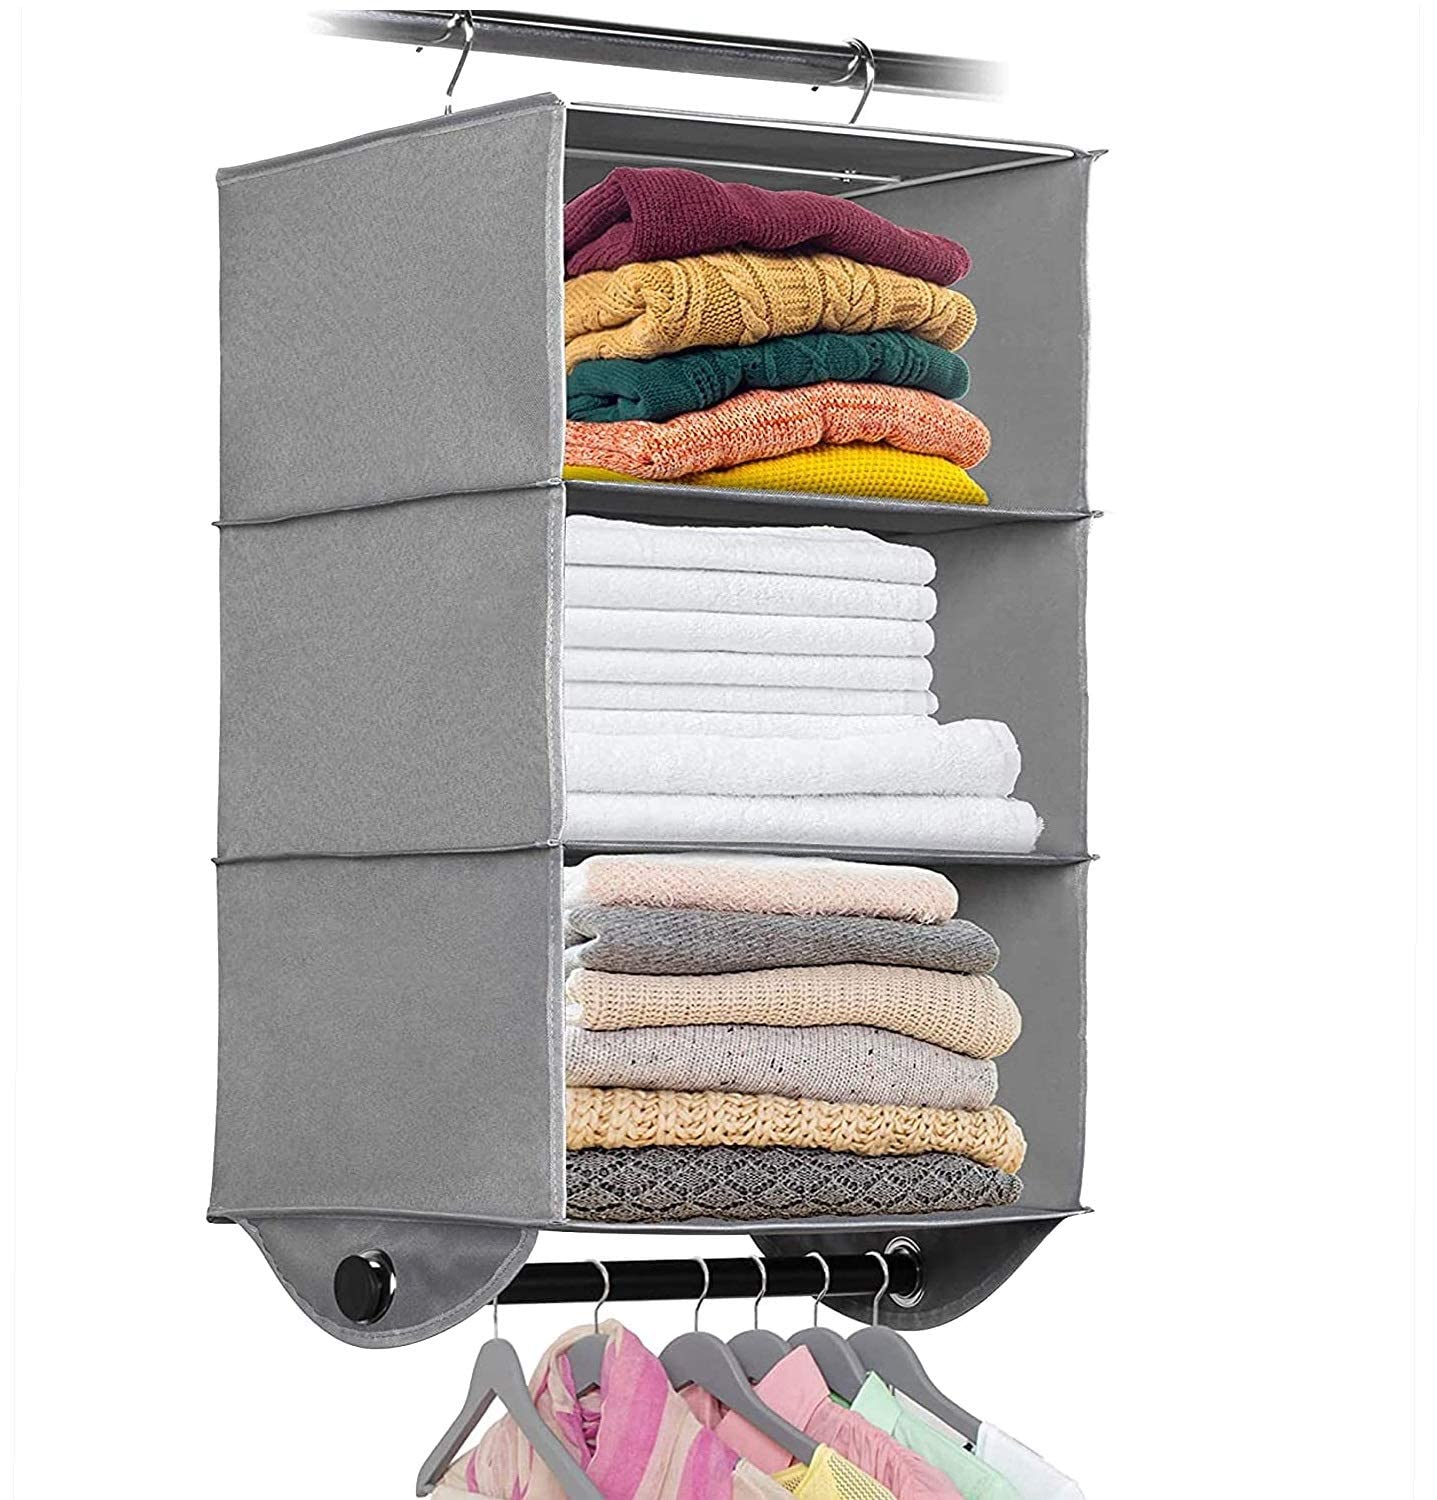 Hanging Closet Organizer with Garment Rod - Heavy Duty Fabric Space Saver for Closets, Easy to Mount, Foldable Closet Storage Shelves, Grey with Black Metal Rod  - Like New